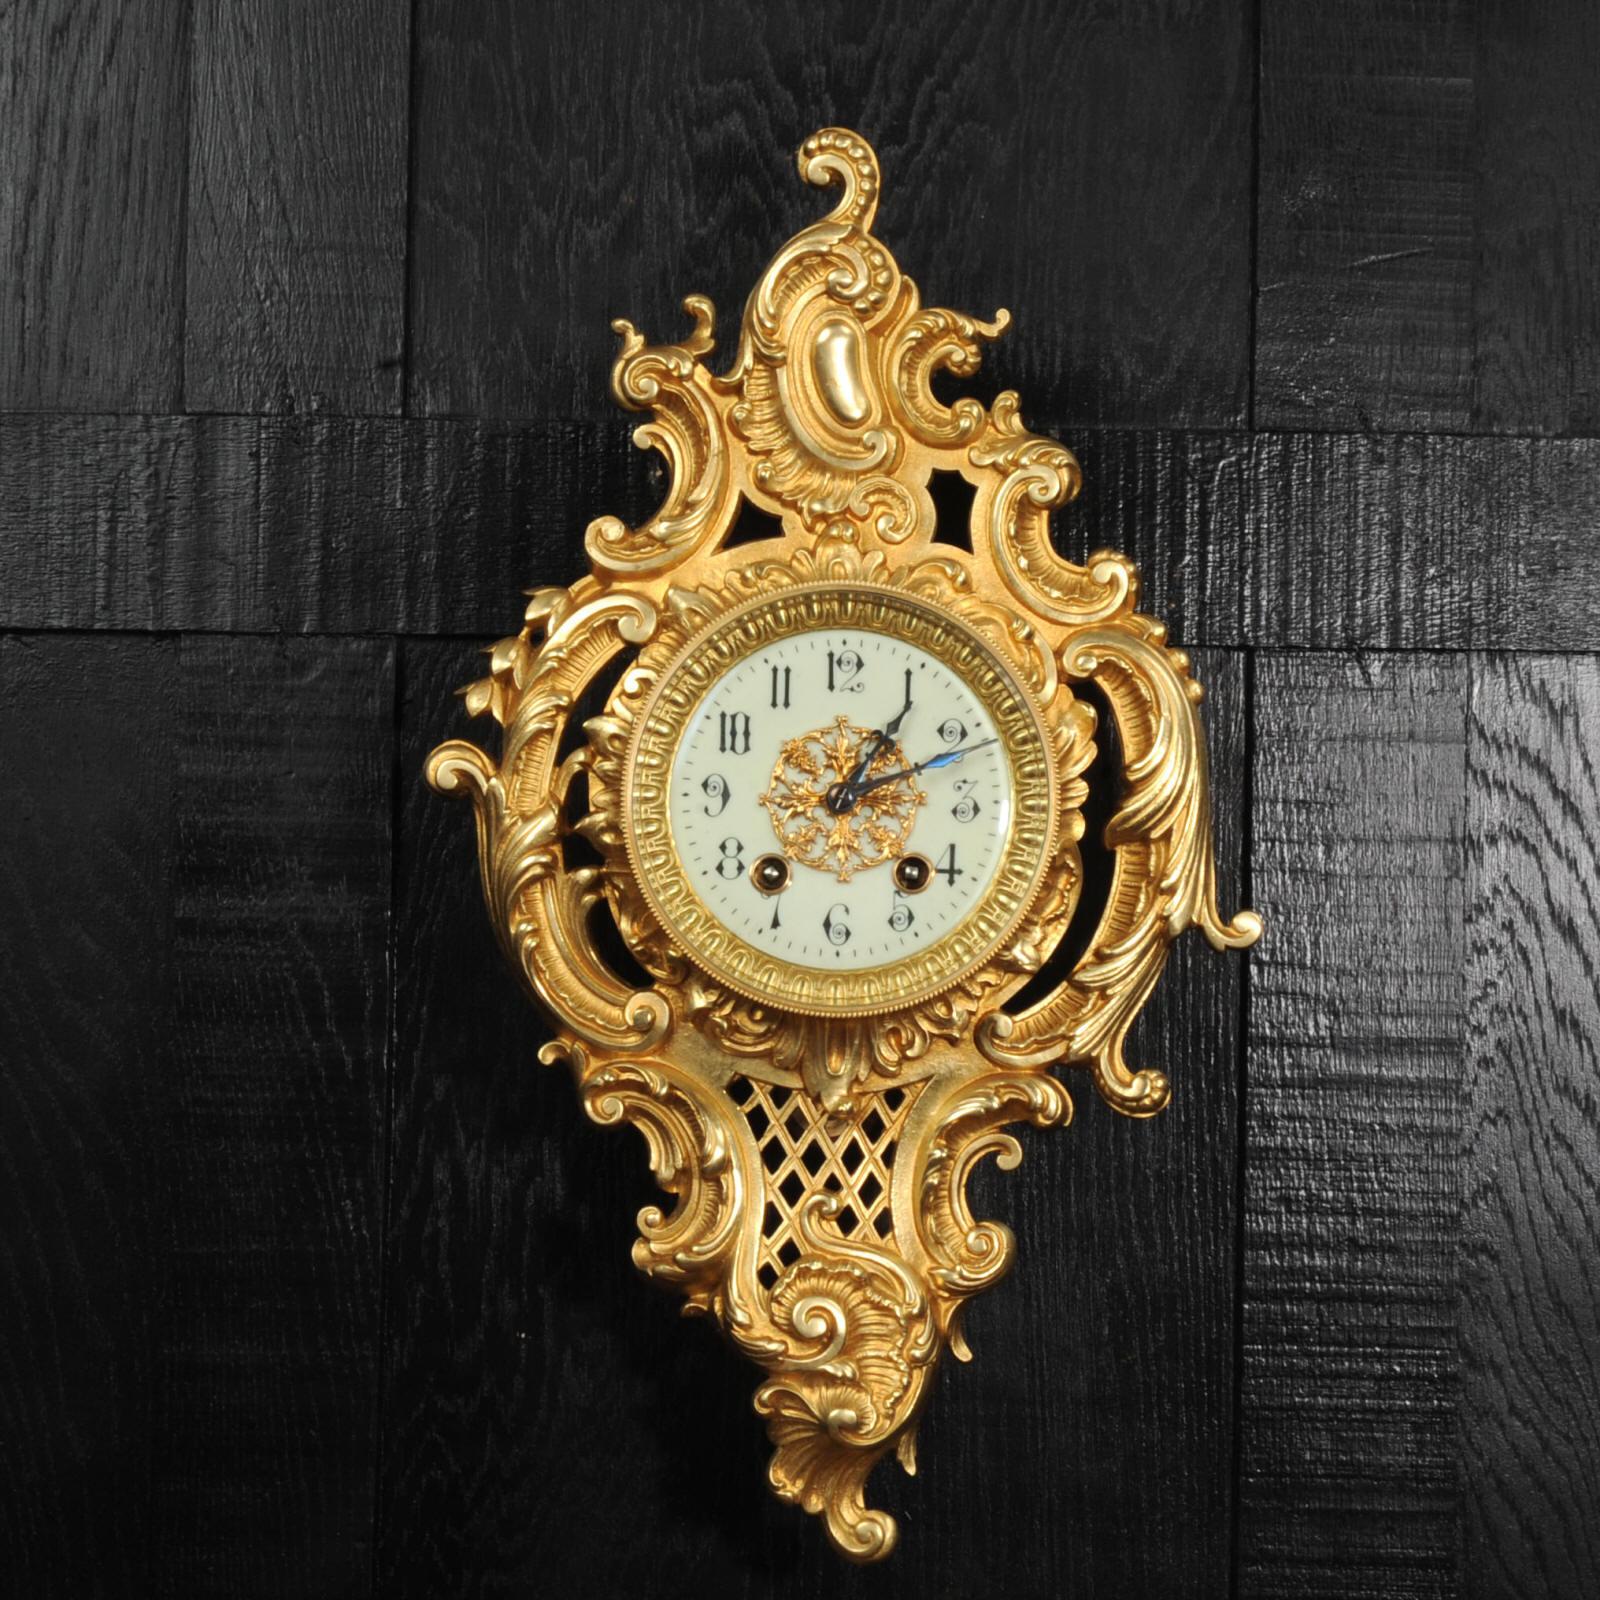 A stunning original antique French wall clock by the famous maker Japy Frères. It is beautifully designed in the Rococo style with profuse asymmetric 'C' scrolls, acanthus leaves and a curved panel of trellis work that allows a glimpse of the